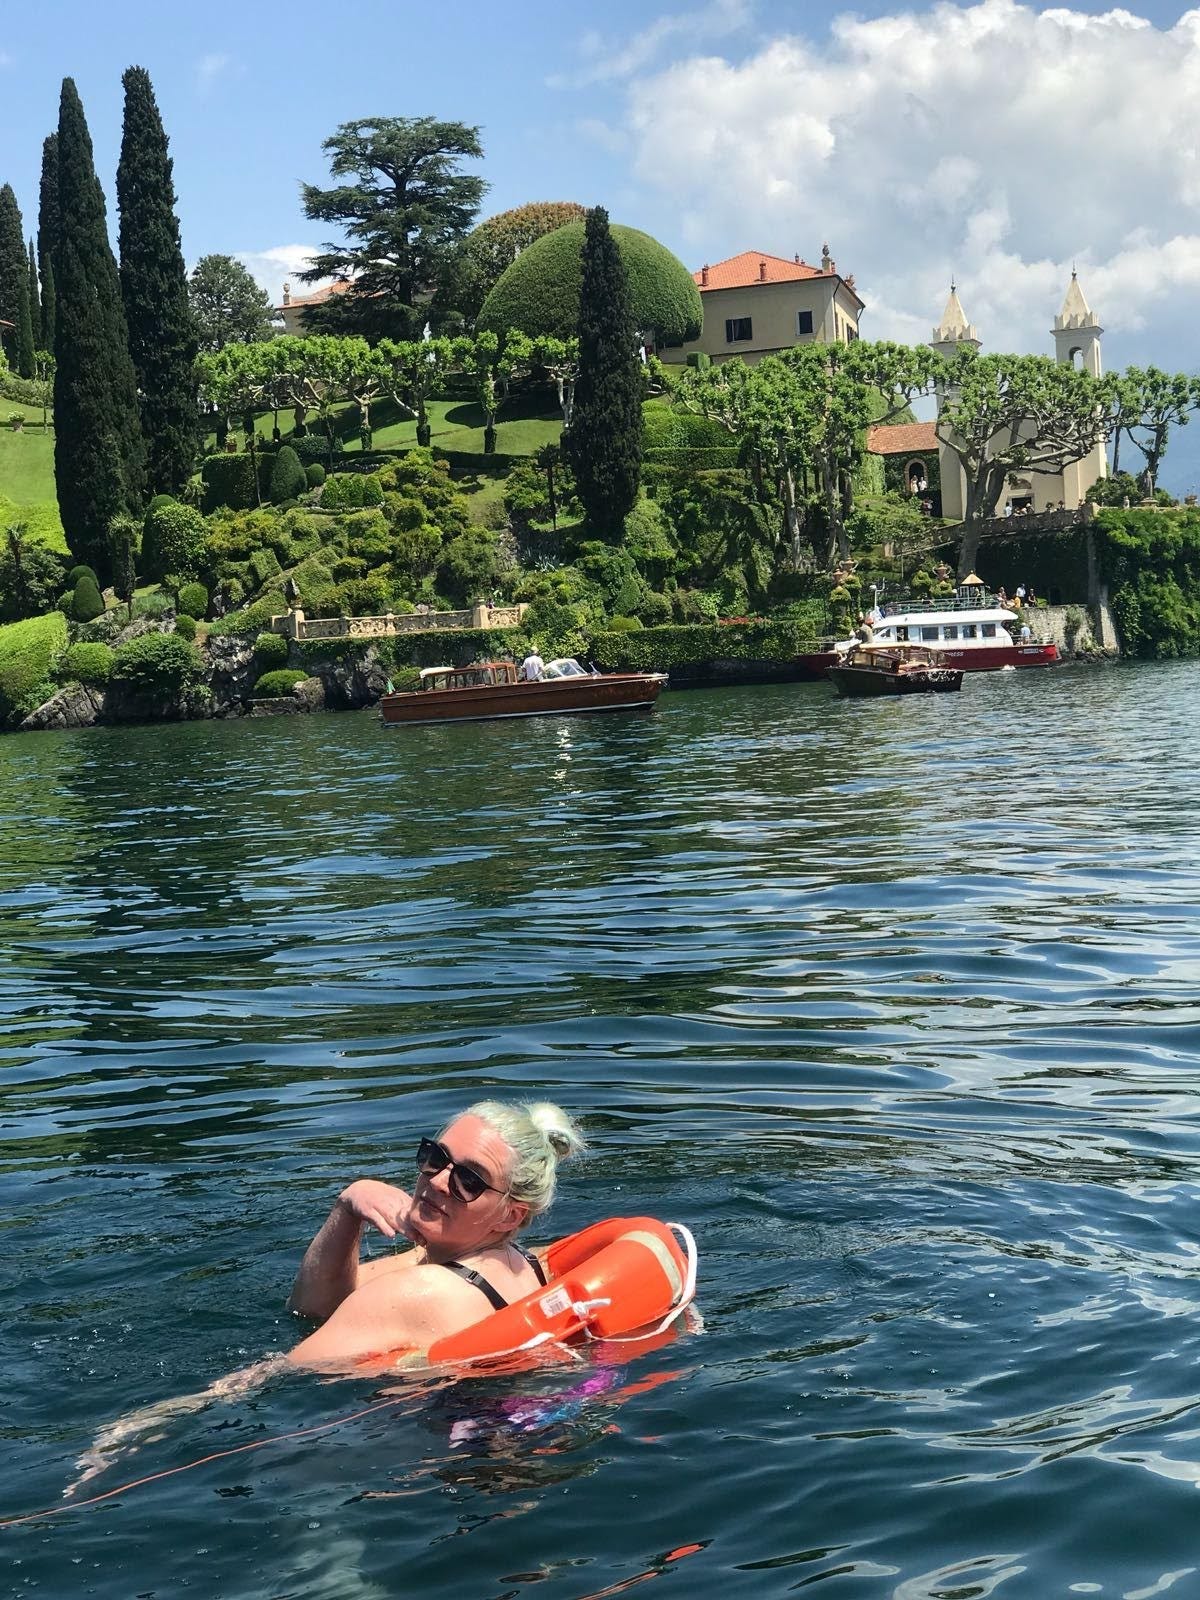 Wearing sunglasses and posing suggestively as I wear a safety ring around my waist in the water, the beautiful backdrop of Lake Como show rich green hills, private yachts and stunning Italian villa. 